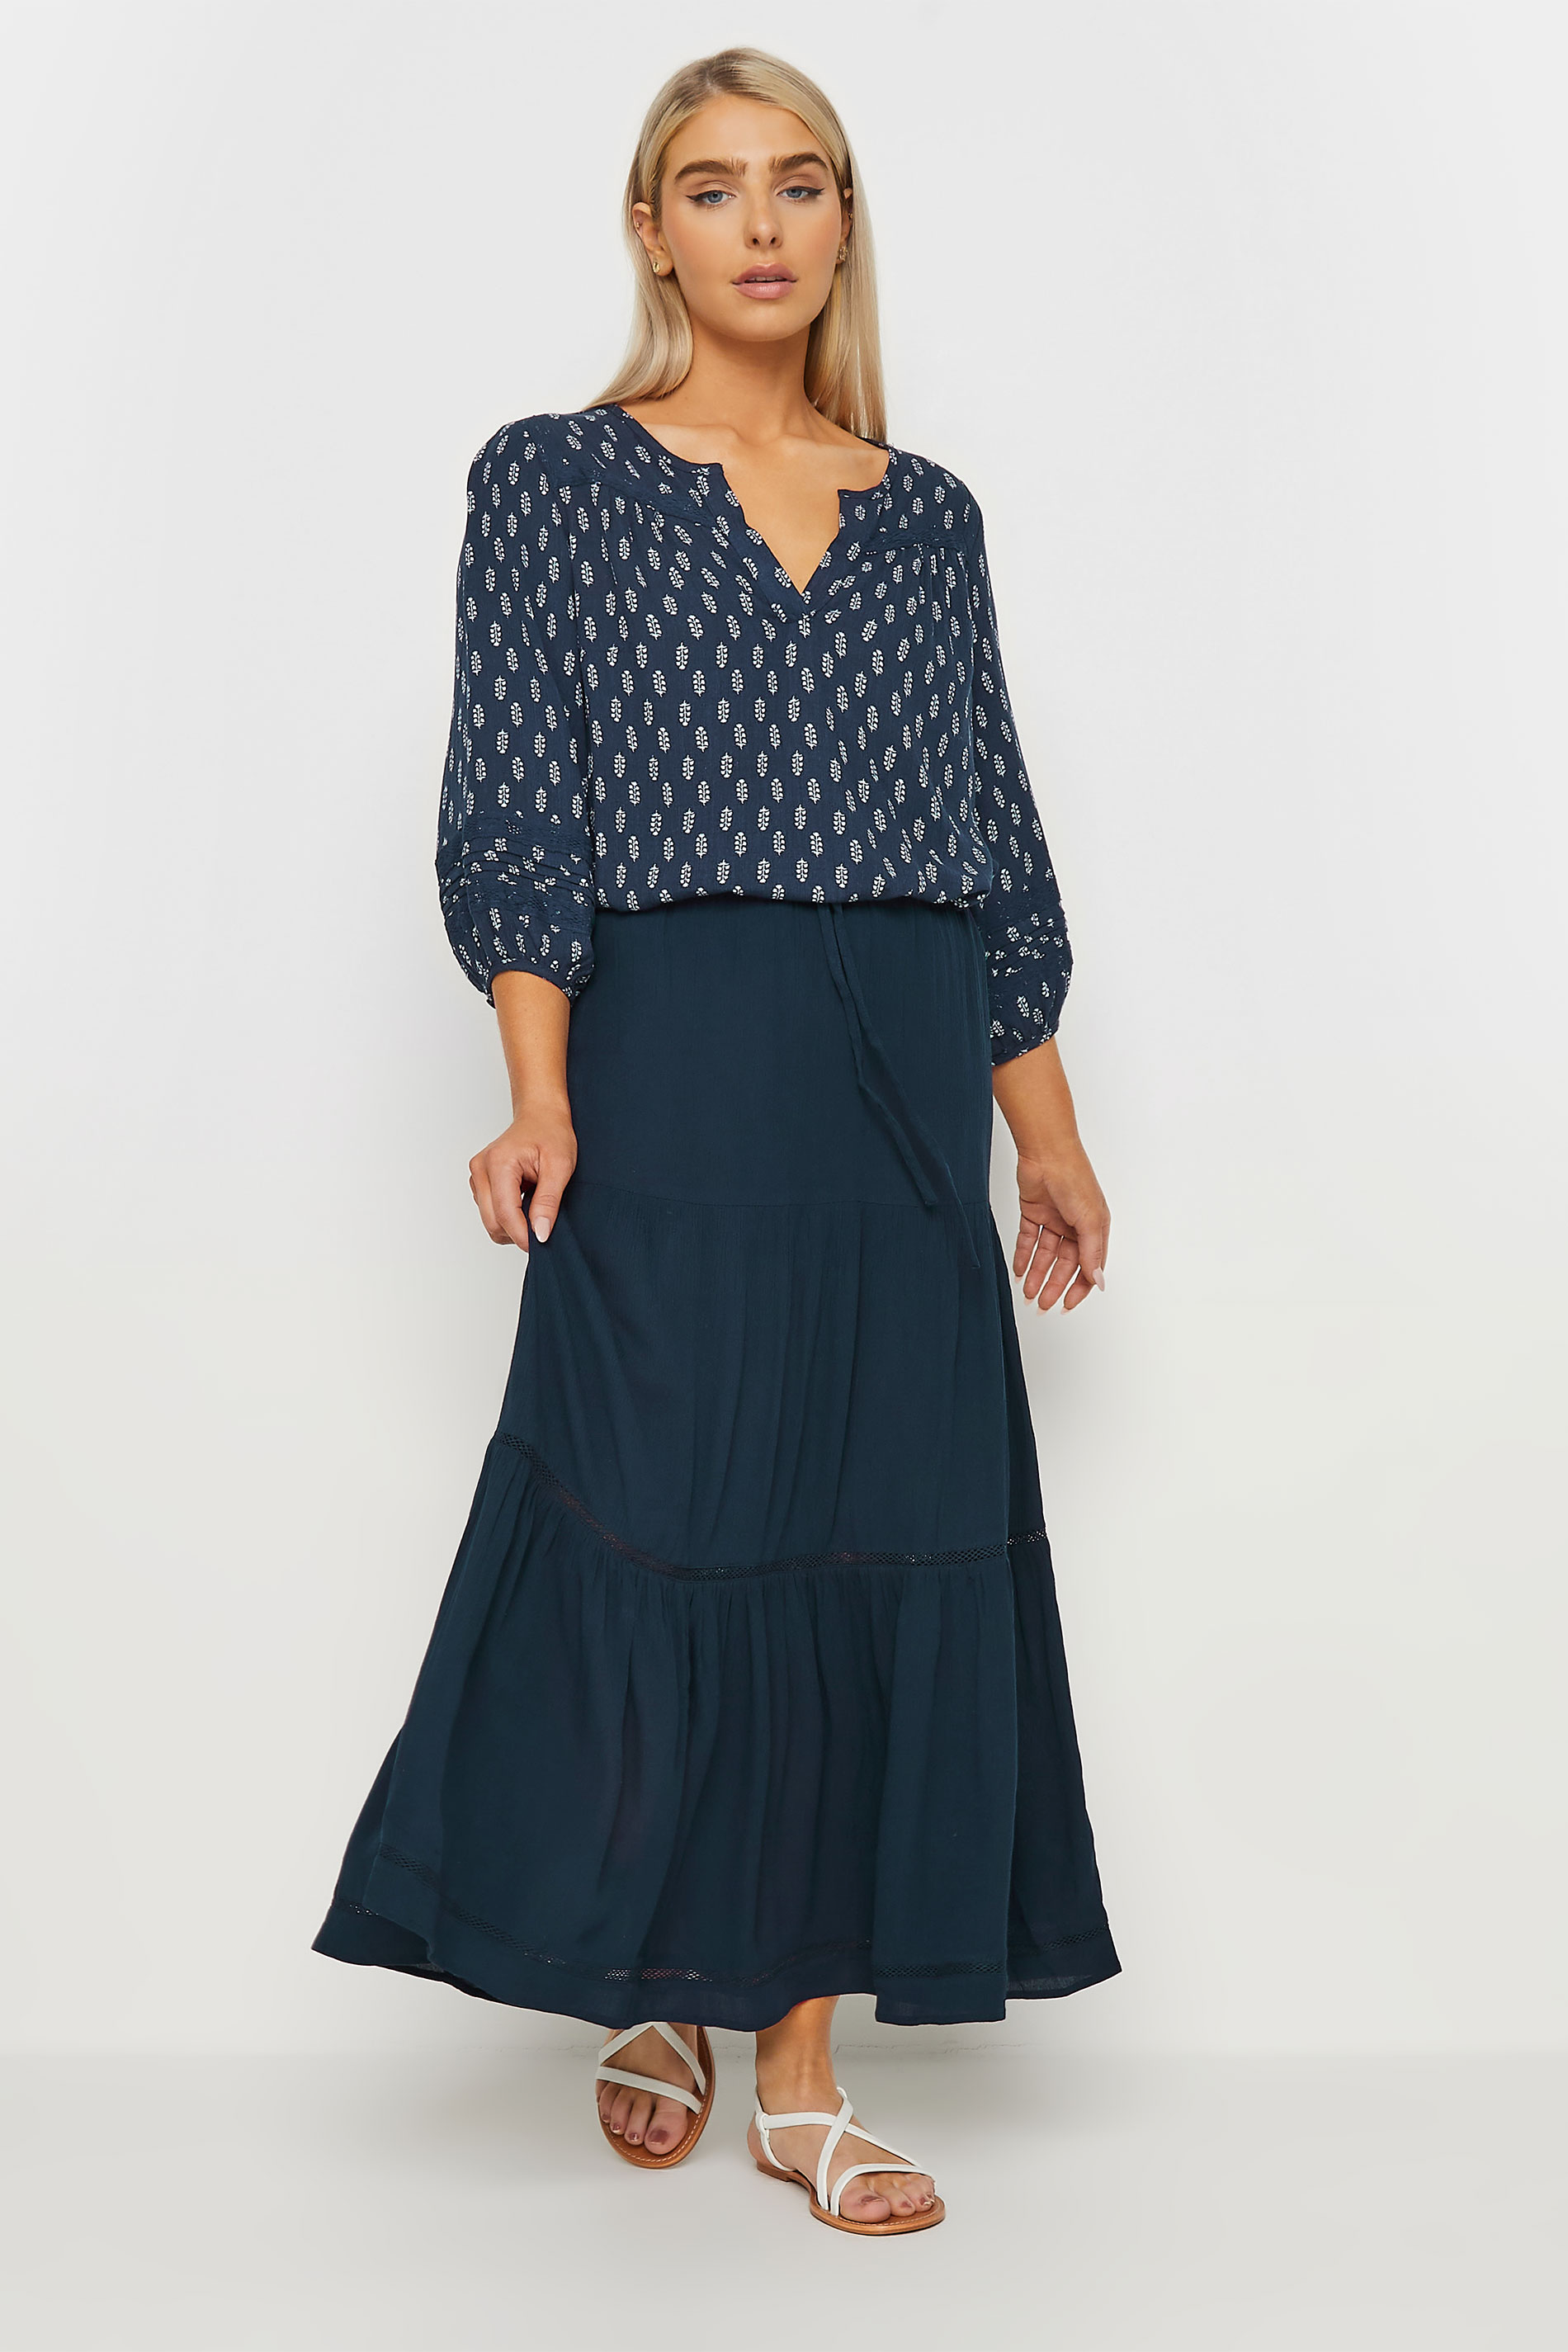 M&Co Navy Blue Tiered Maxi Skirt | M&Co 2